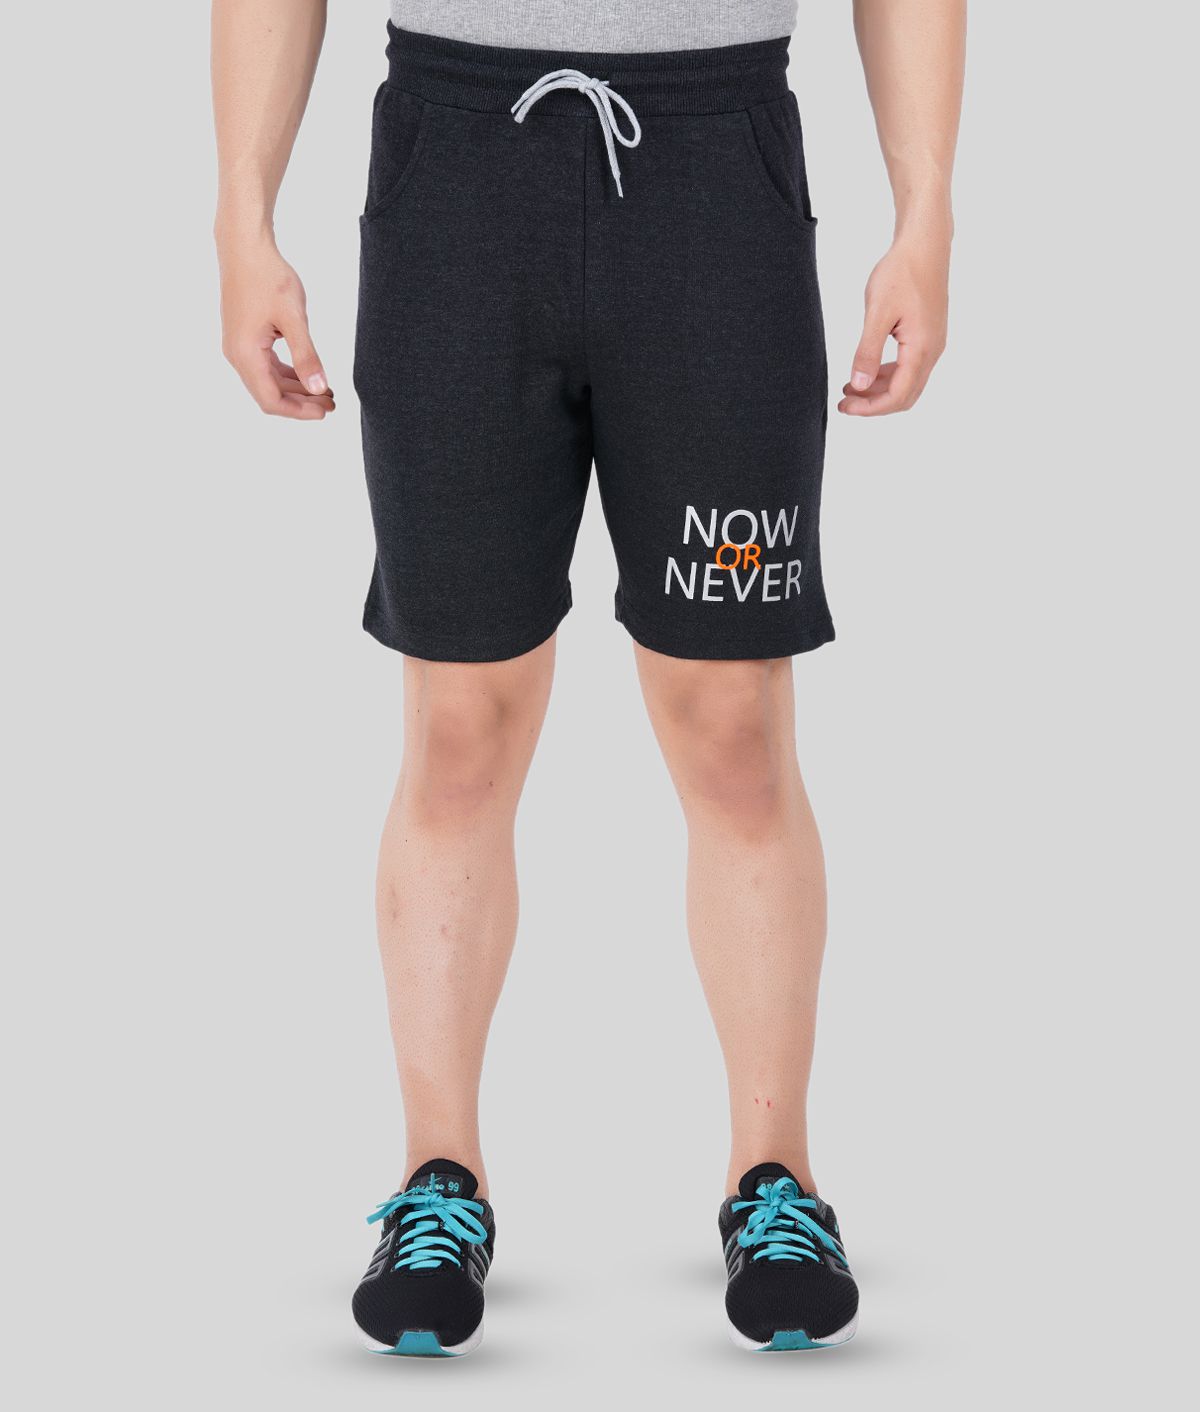 NOW OR NEVER - Multi Cotton Blend Men's Shorts ( Pack of 1 )